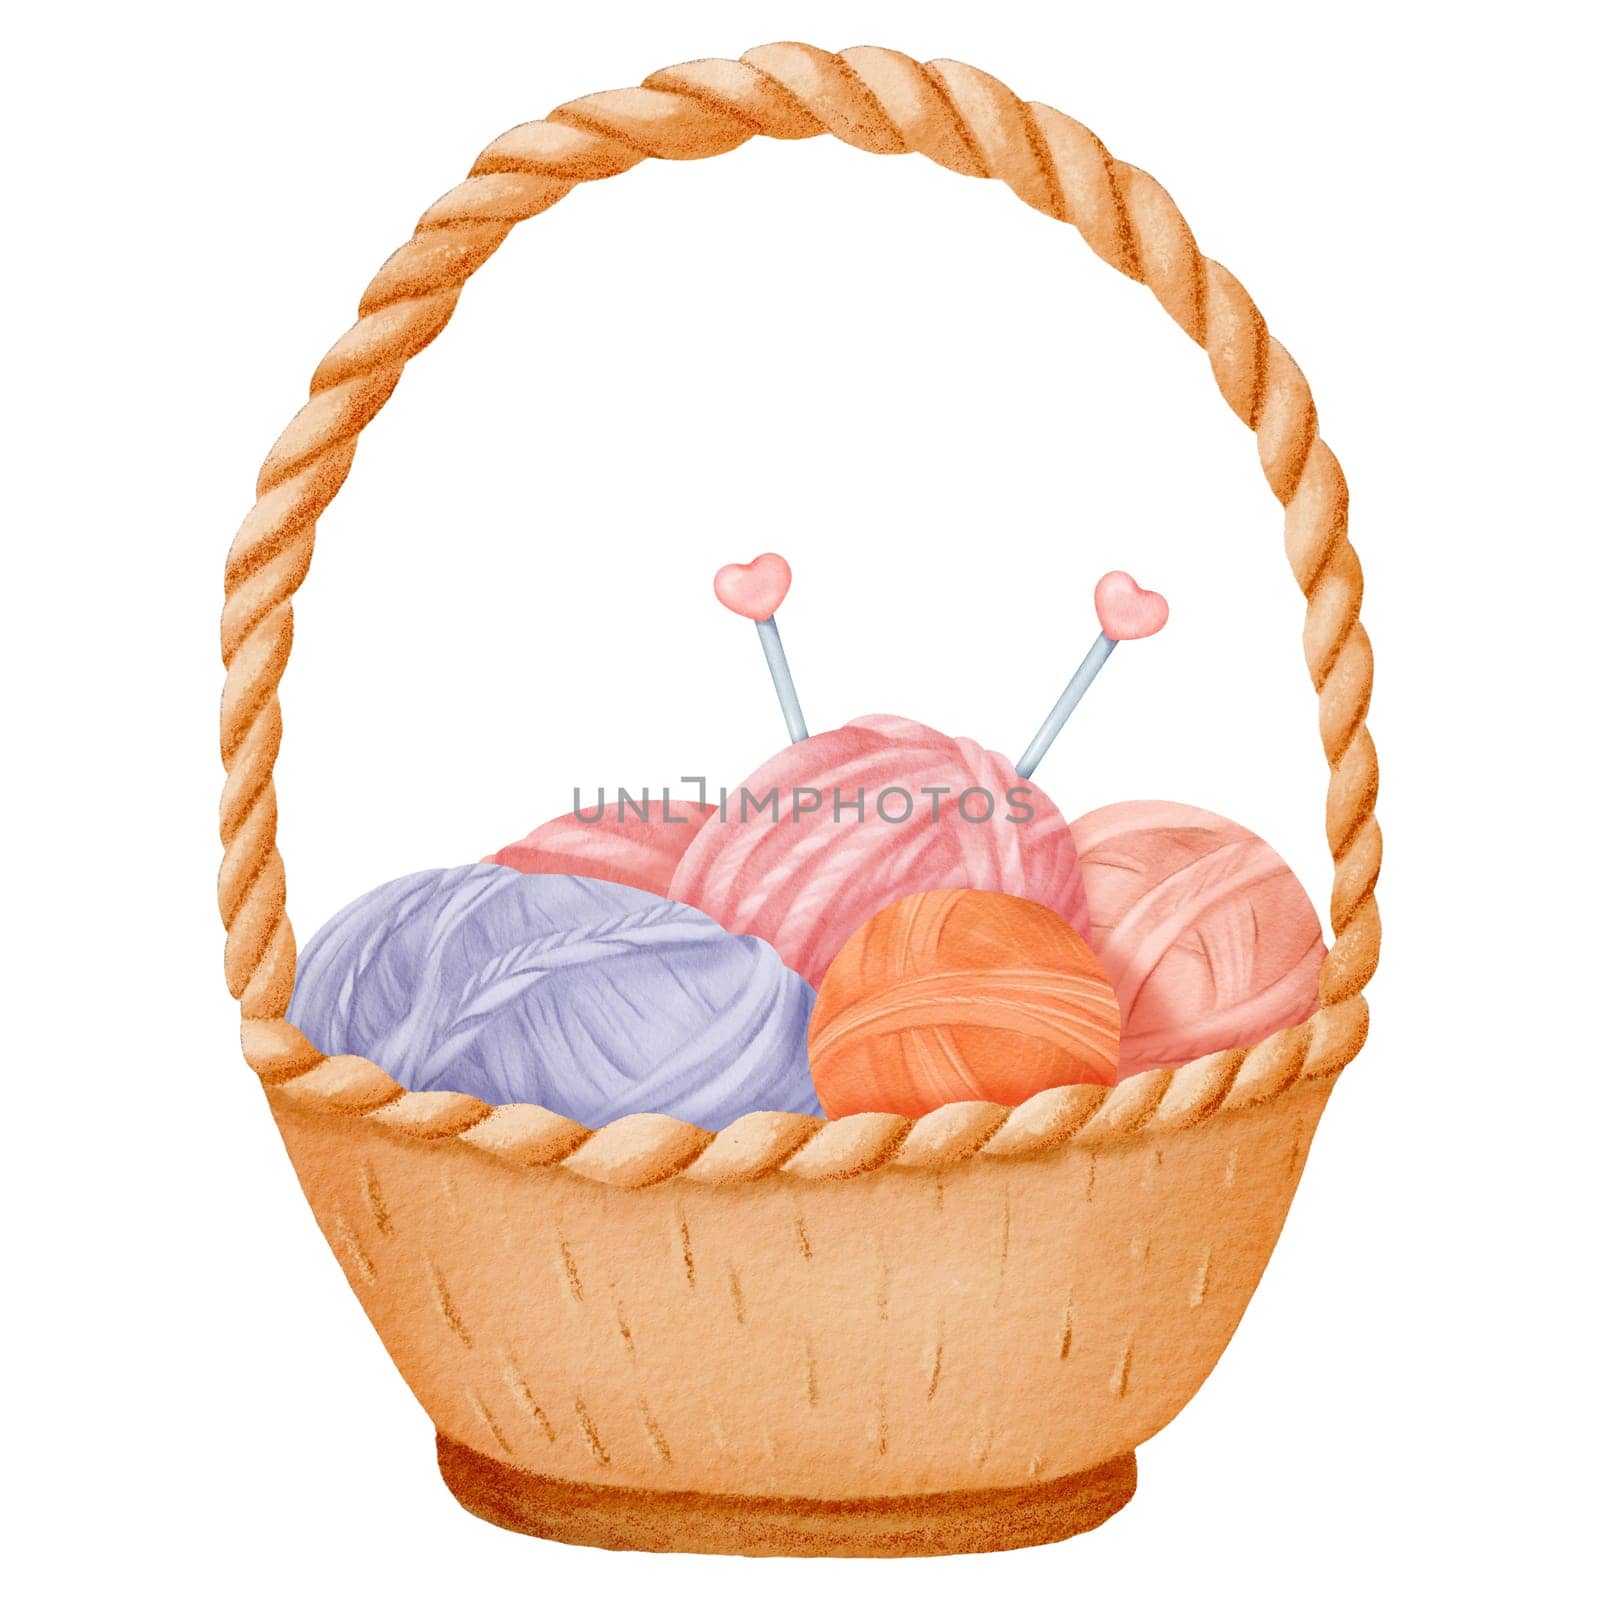 A cozy composition featuring a woven basket filled with colorful yarn skeins and knitting needles. Perfect for crafting blogs, cozy home decor designs, or DIY-themed projects. Watercolor illustration by Art_Mari_Ka